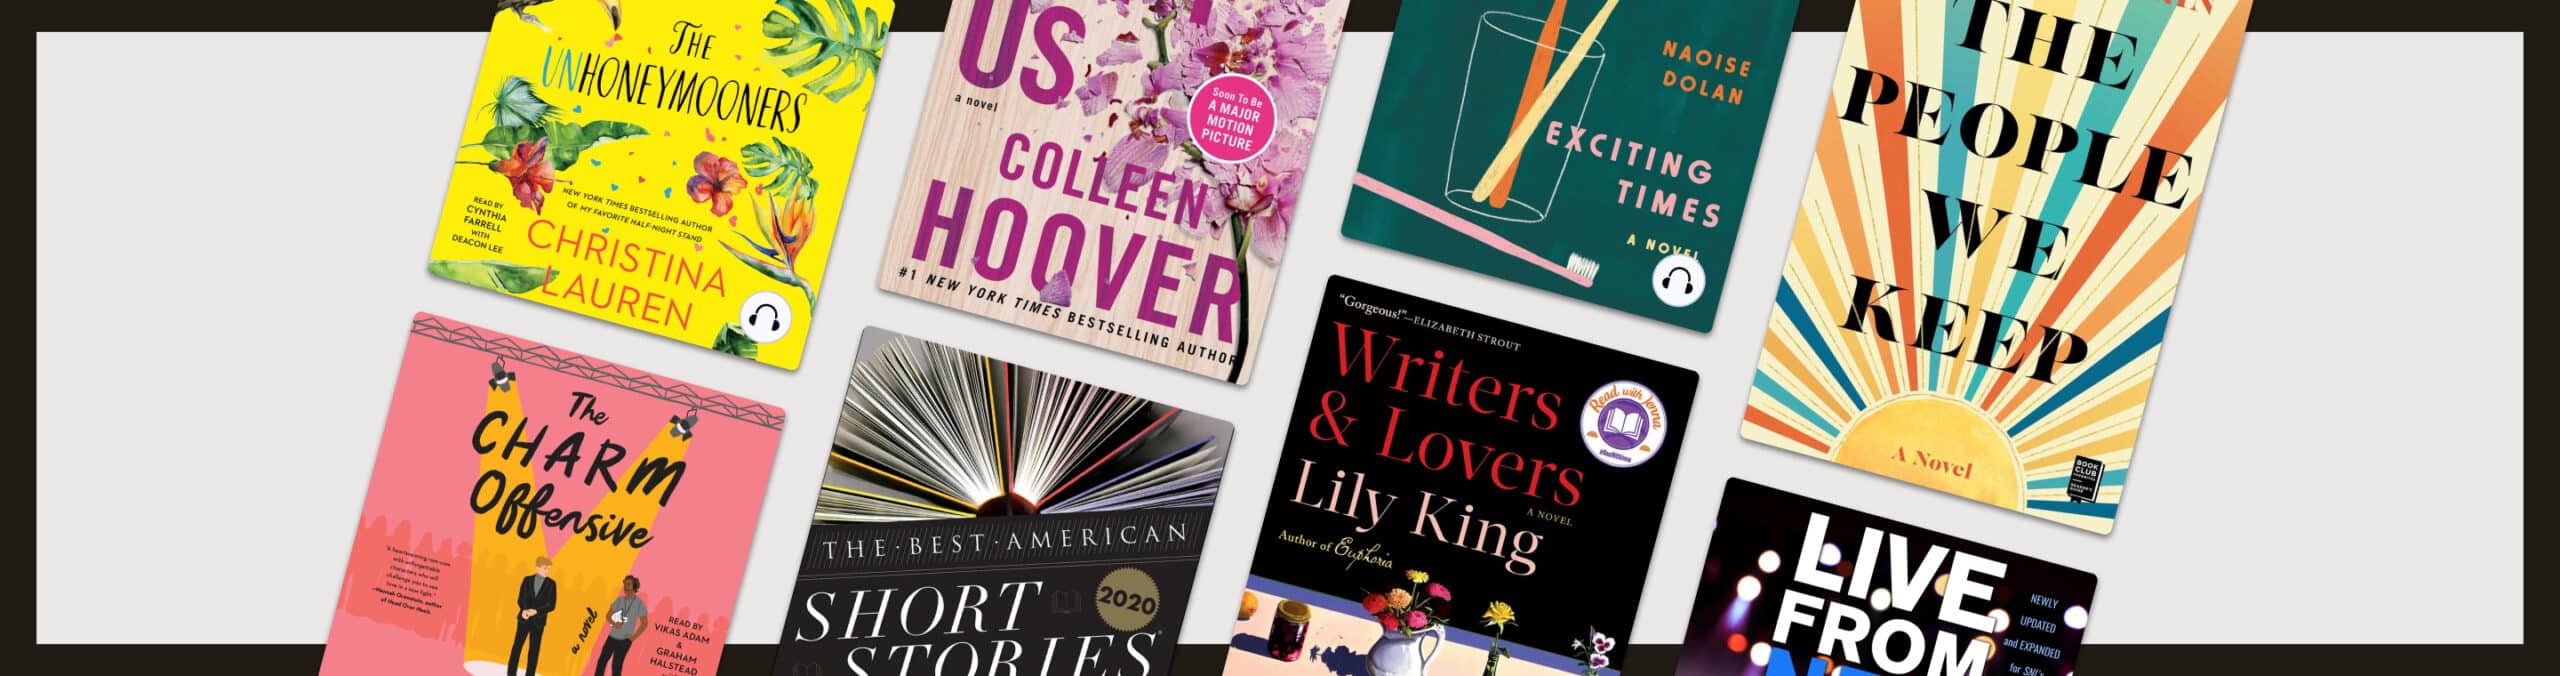 8 charming books like ‘Romantic Comedy’ by Curtis Sittenfeld